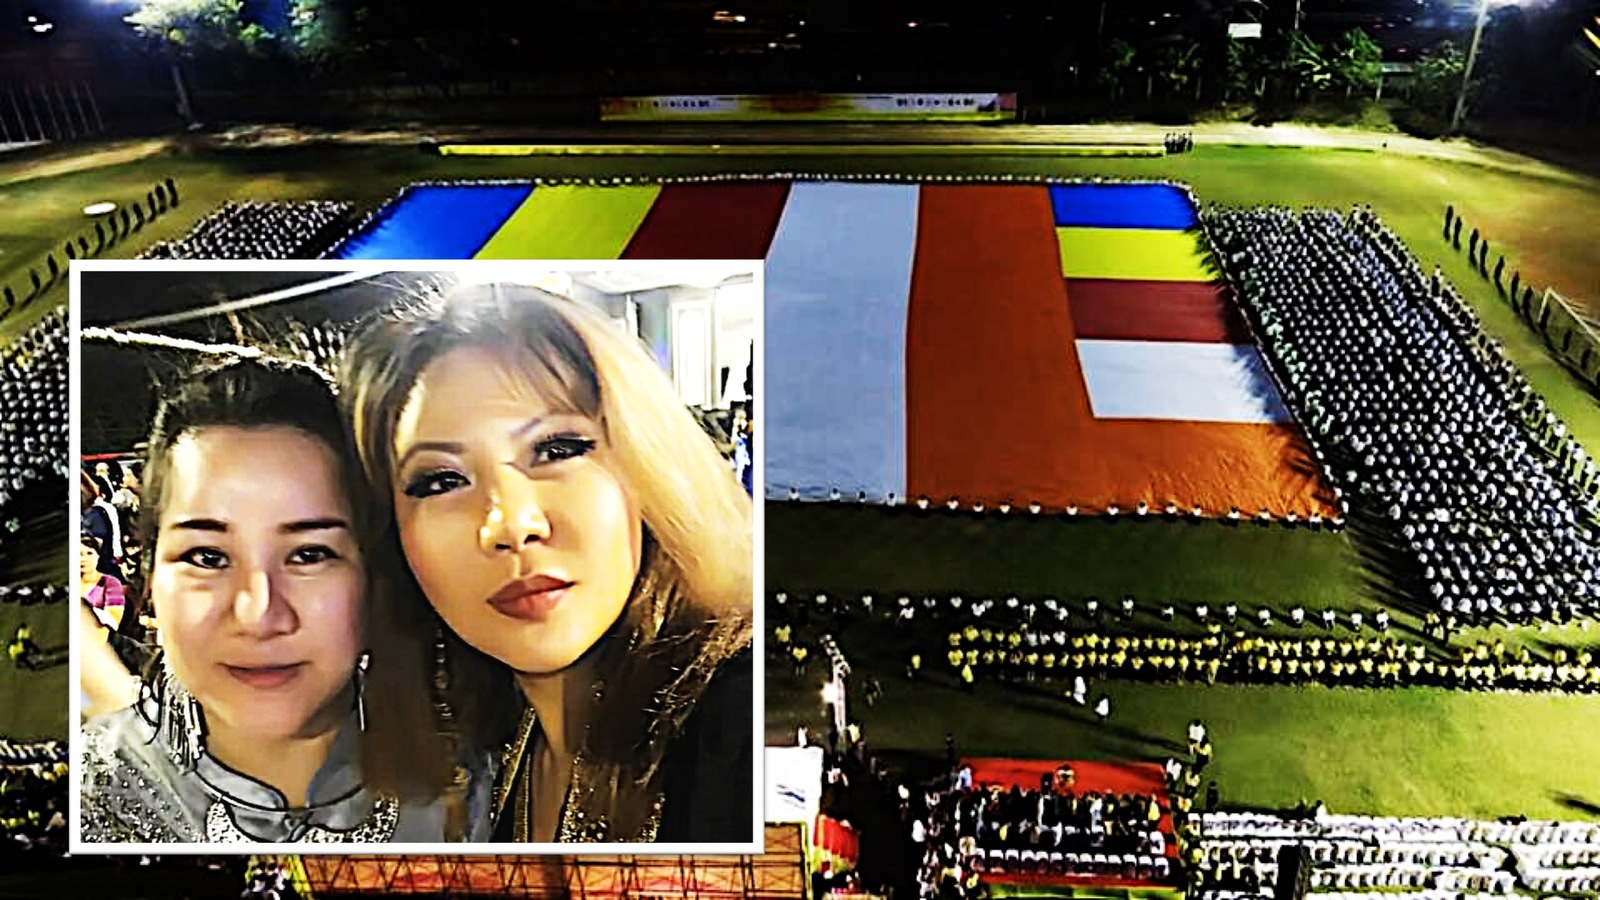 r-aphinita-chainana-unveiled-the-largest-buddhist-flag-in-thailand-press-release-digital-journal.jpg